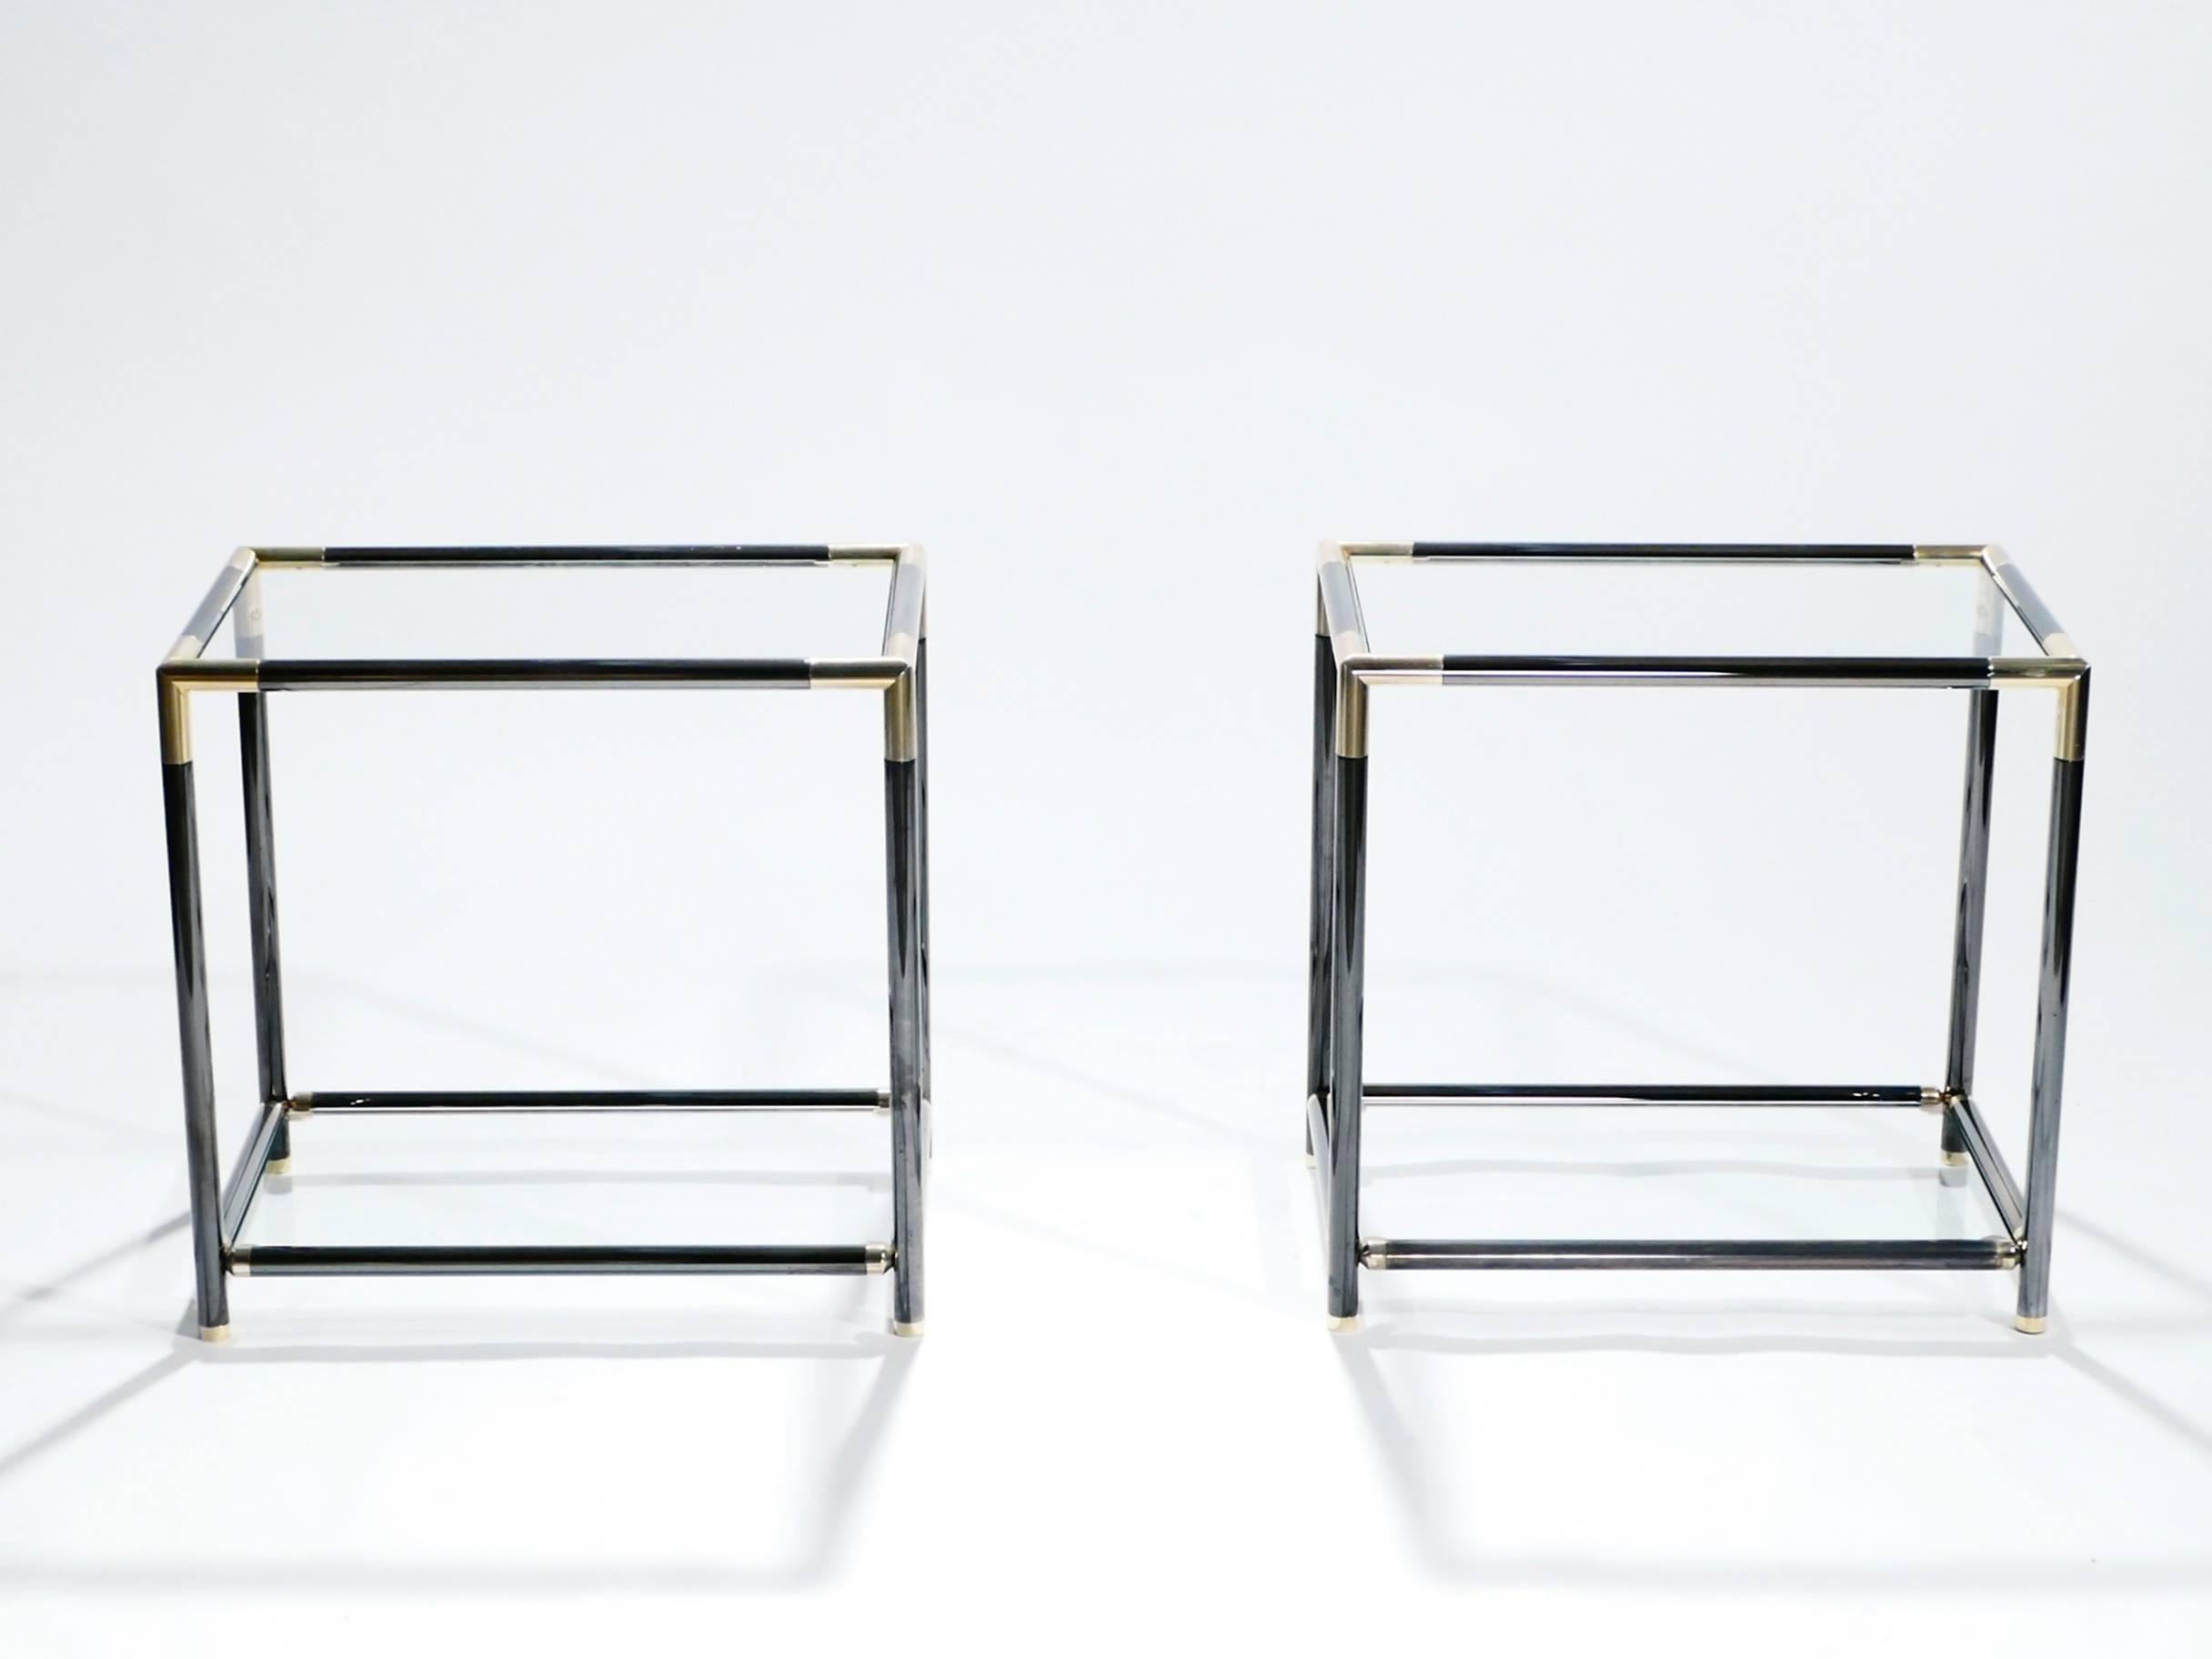 The designer of this pair of gunmetal and brass side tables aimed to emulate the simple structure and visual drama of Maison Jansen’s iconic style. Sleek lines and an ordinary rectangular structure are offset by bright brass joints at all four